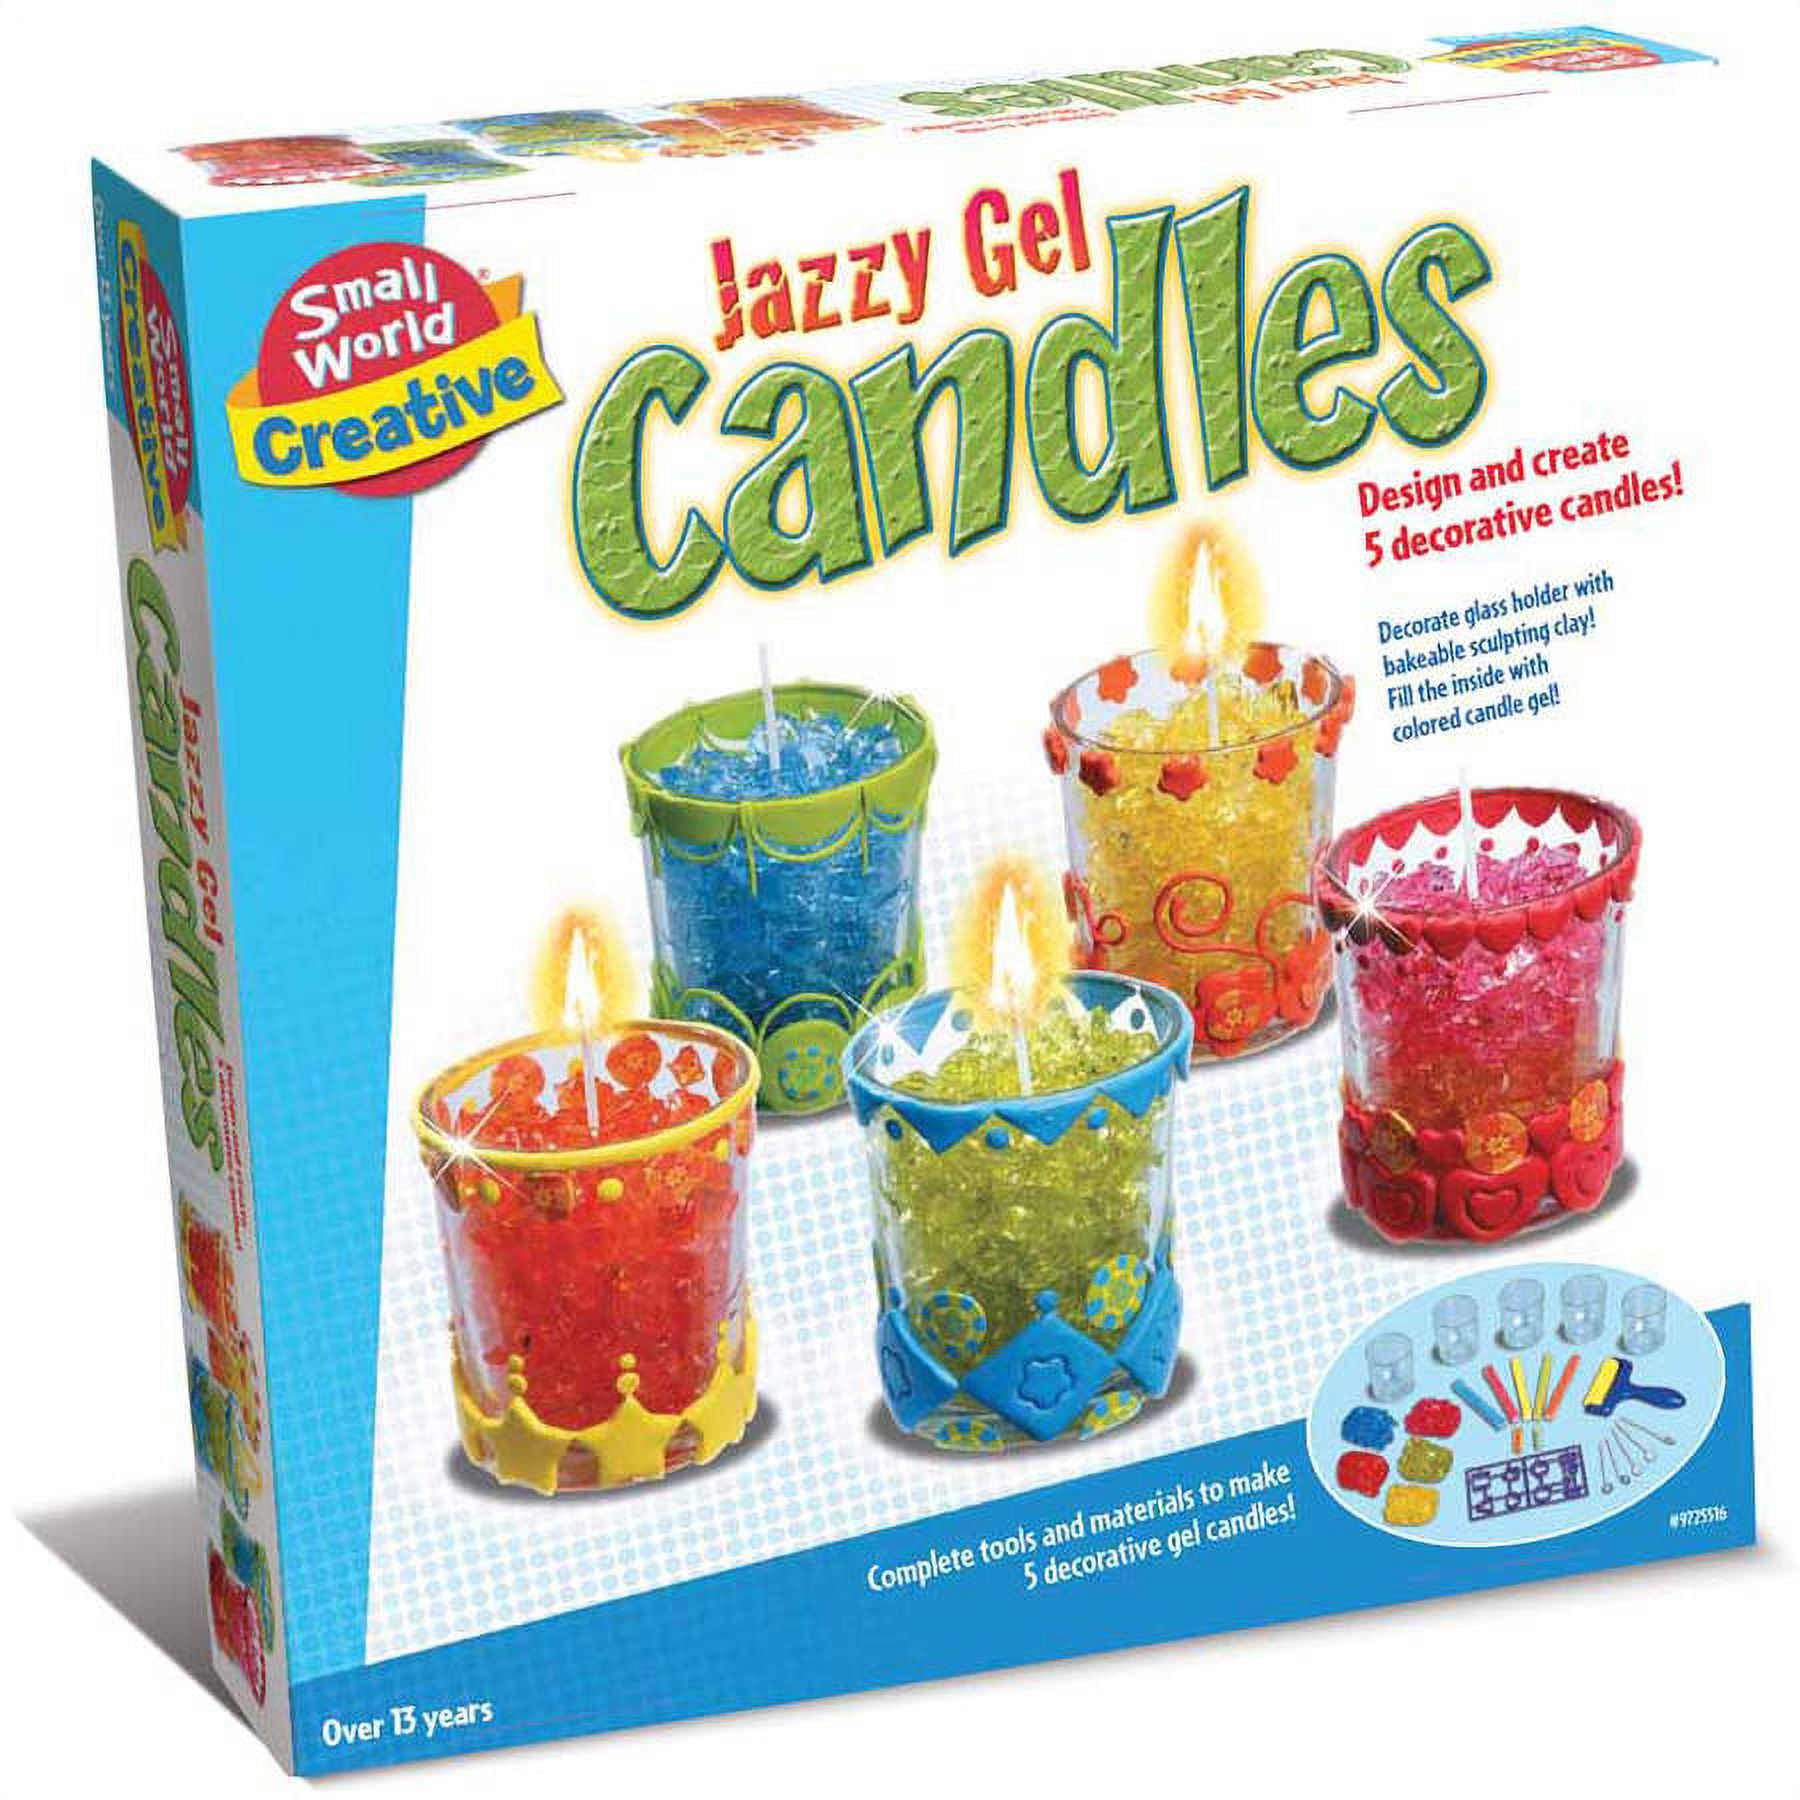 Gel candles all different sizes and kinds - arts & crafts - by owner - sale  - craigslist